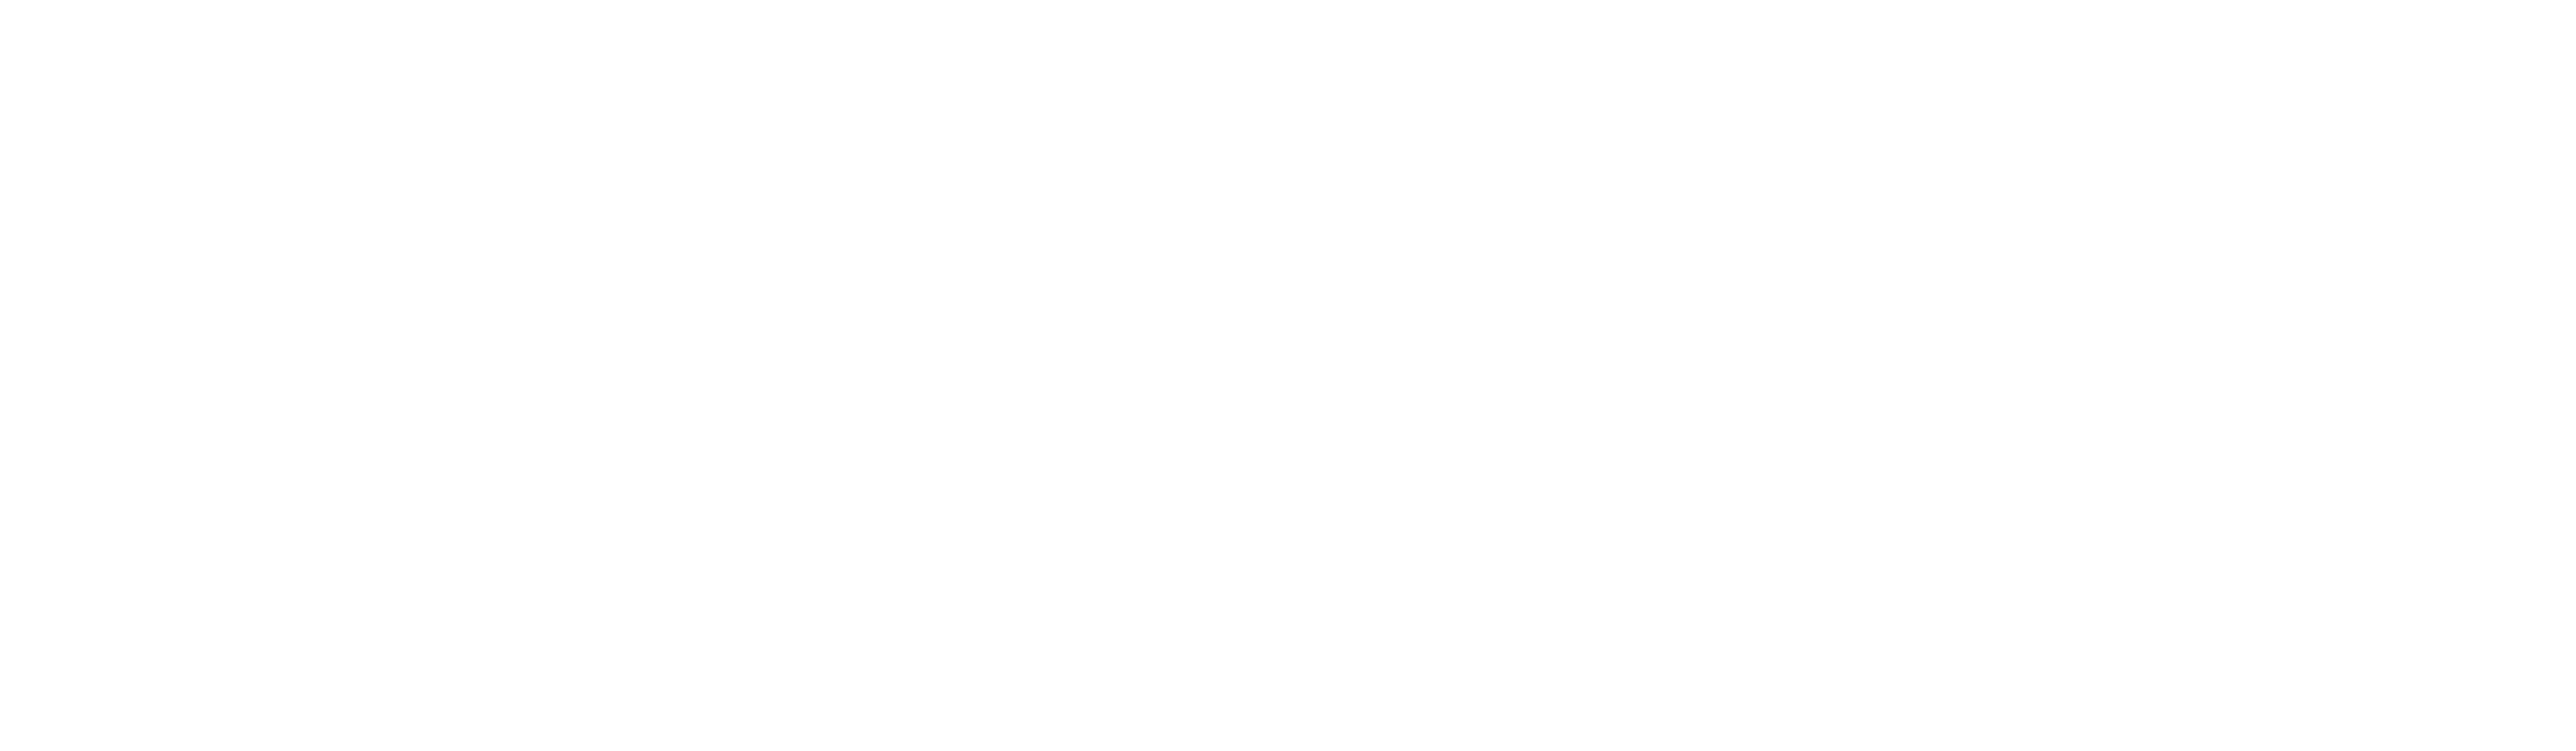 Michigan Foot & Ankle Specialists